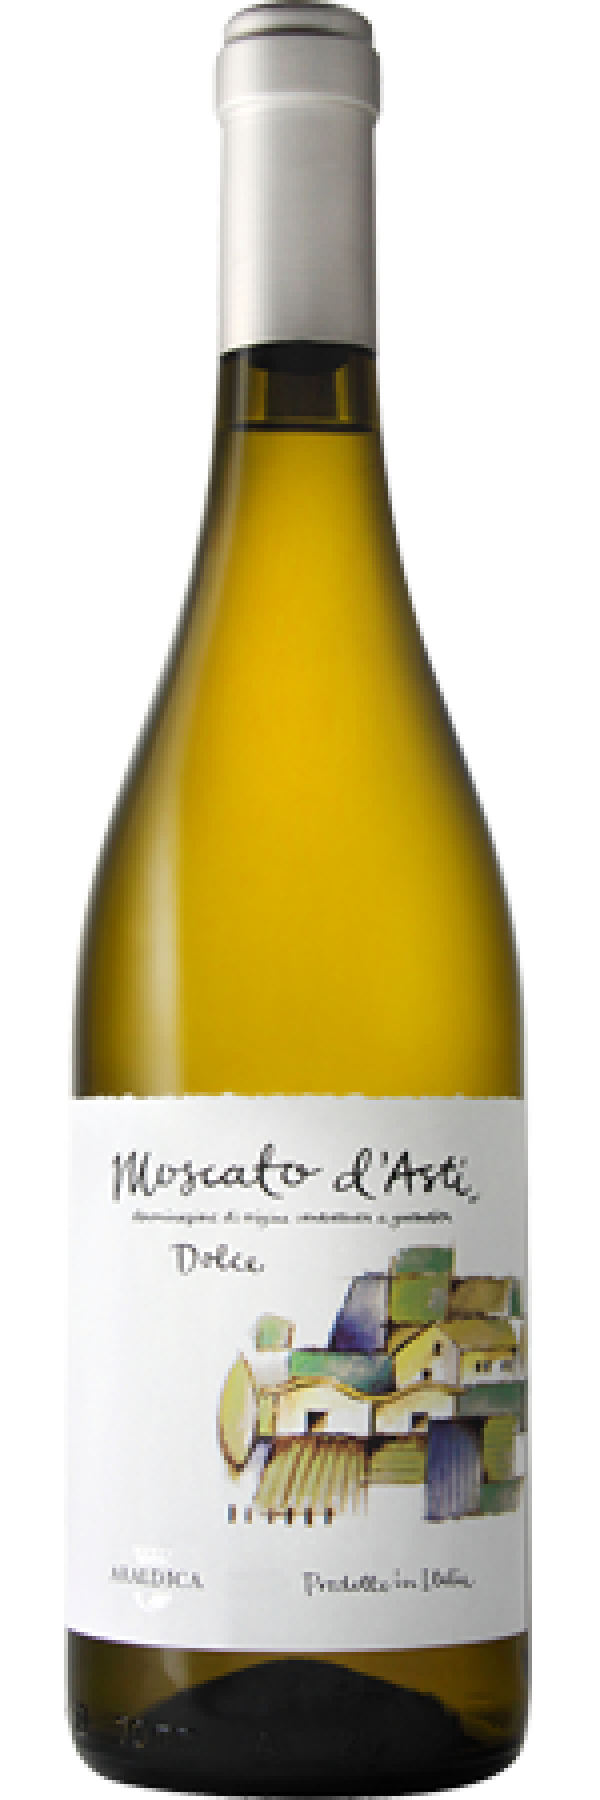 Moscato d'Asti Dolce